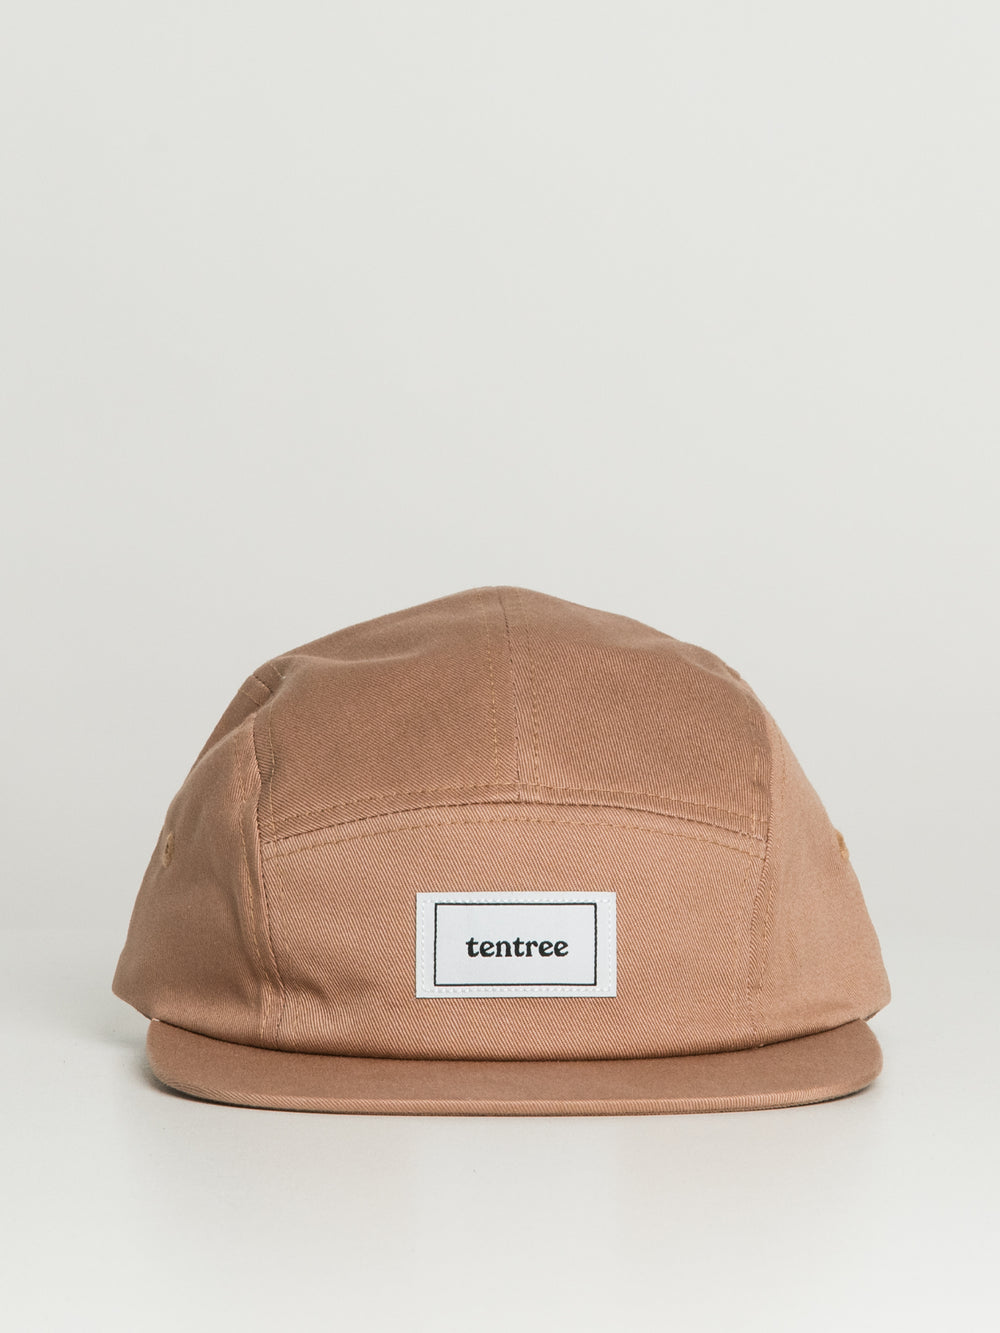 TENTREE AJUSTABLE 5 PANEL CAMPER TWILL HAT - CLEARANCE